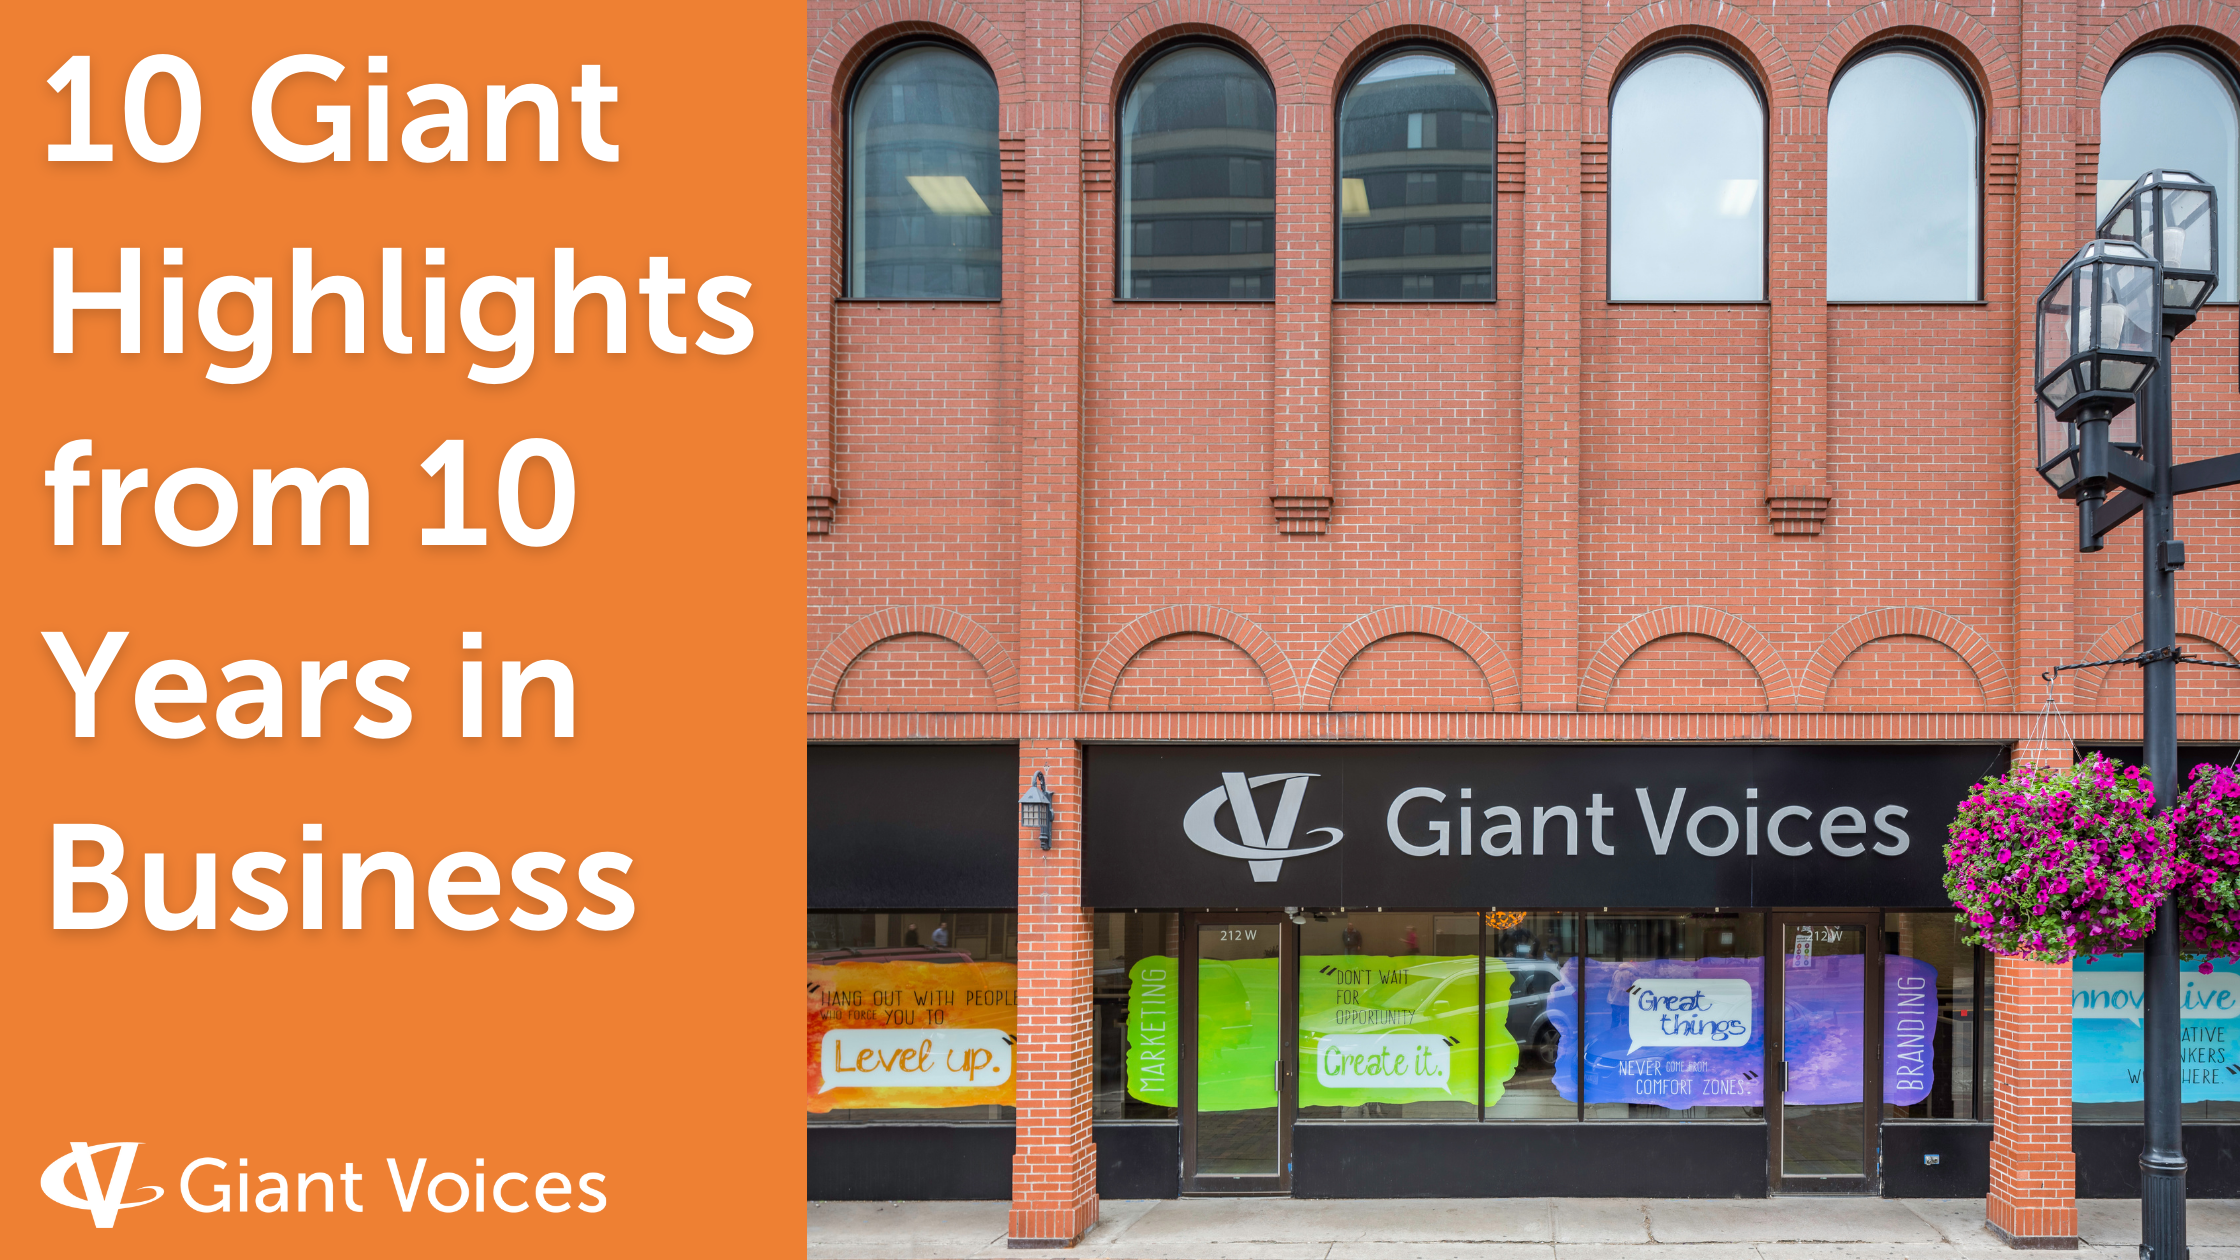 10 Giant Highlights from 10 Years in Business